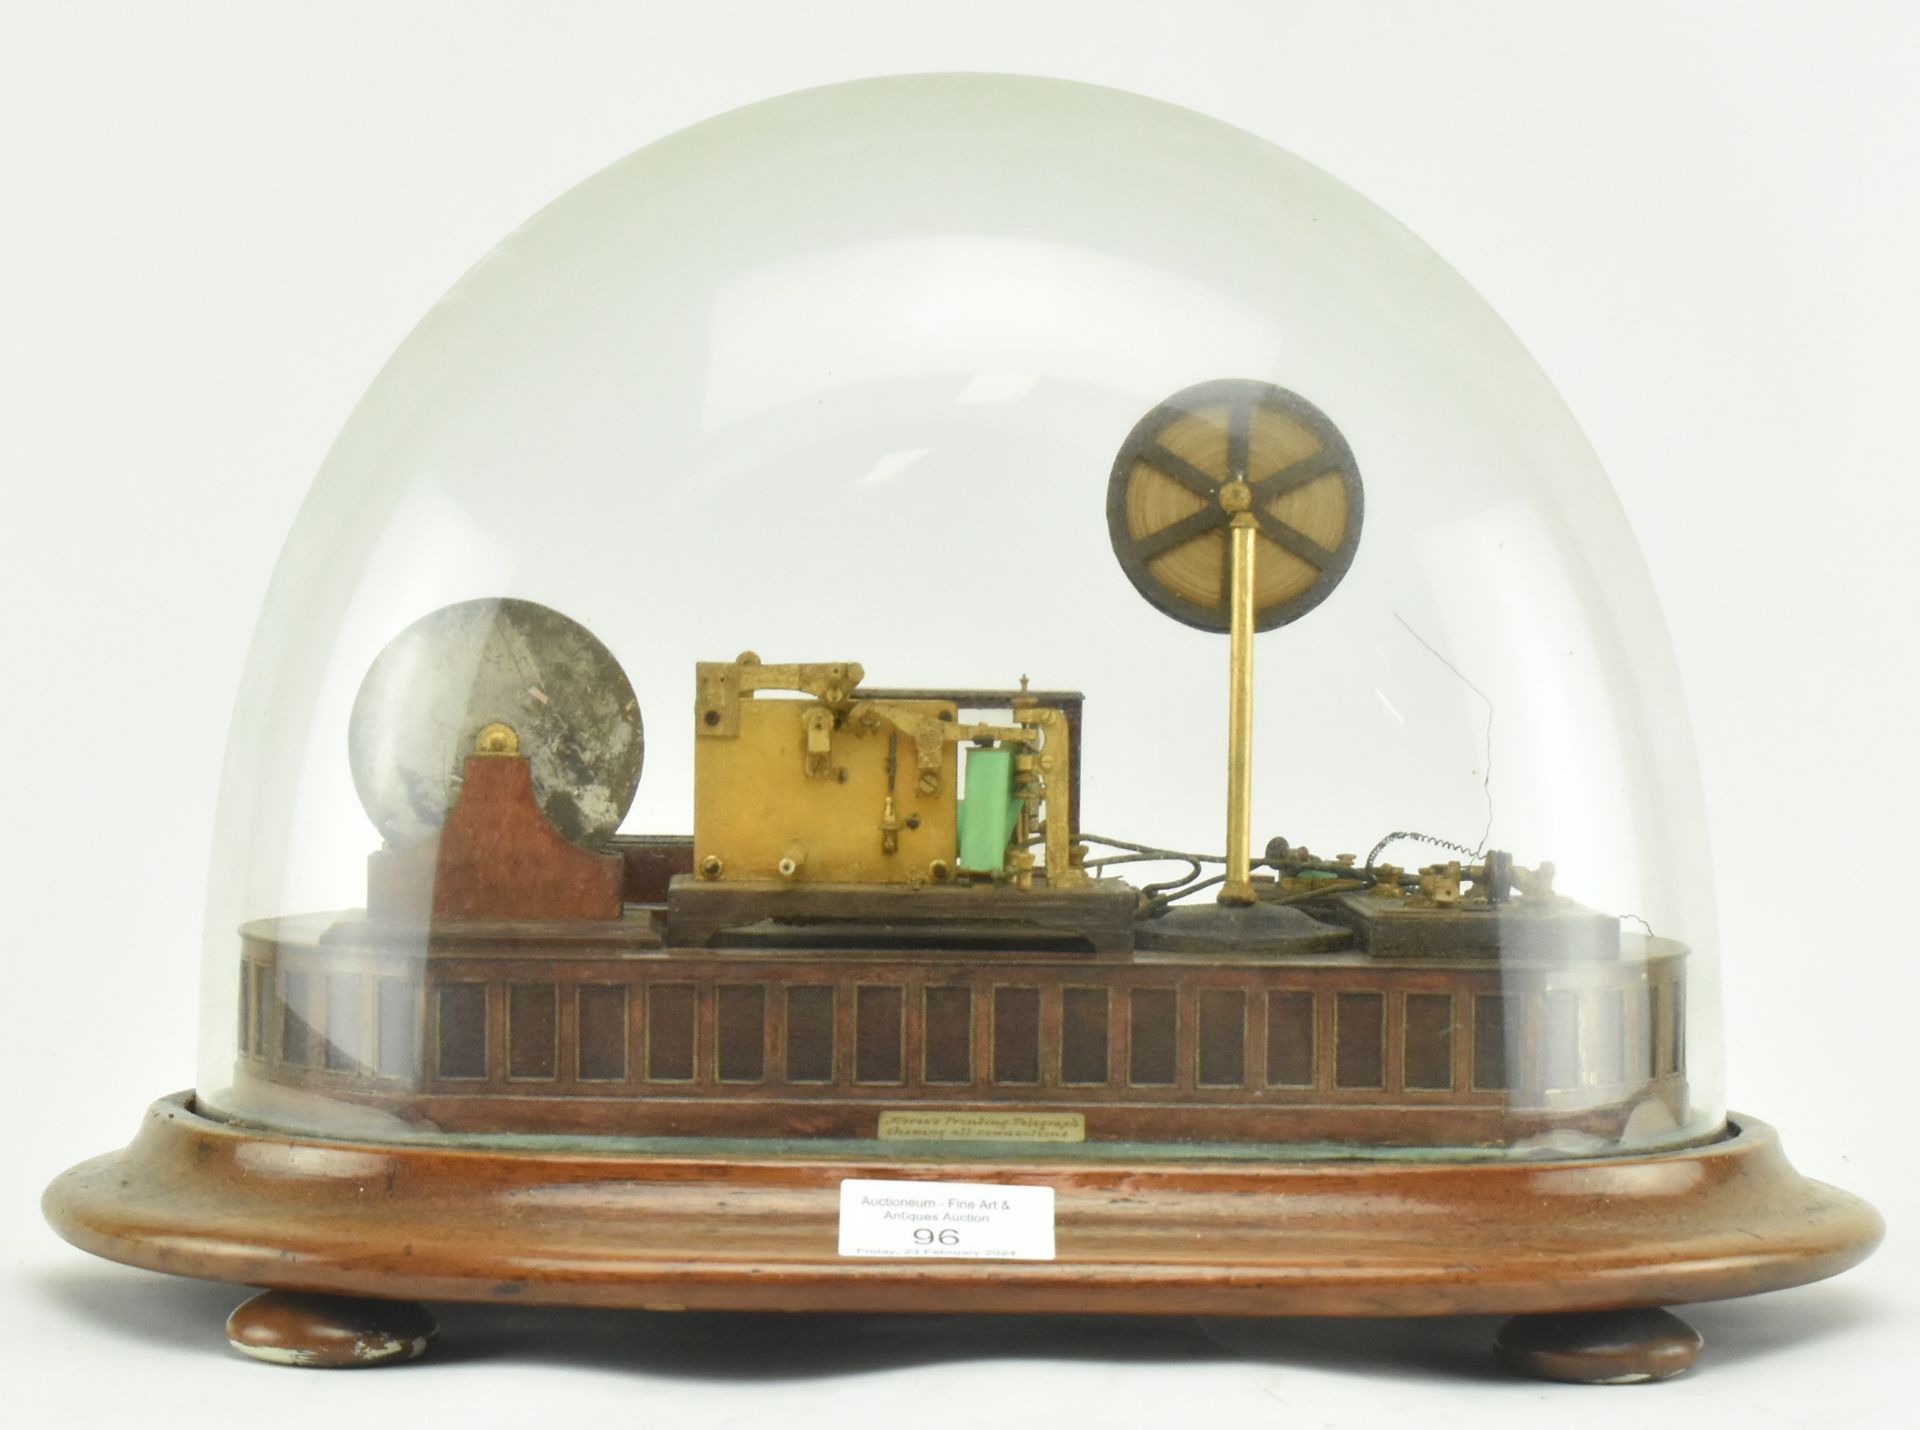 SCRATCH BUILT MORSE'S PRINTING TELEGRAPH MODEL IN GLASS DOME